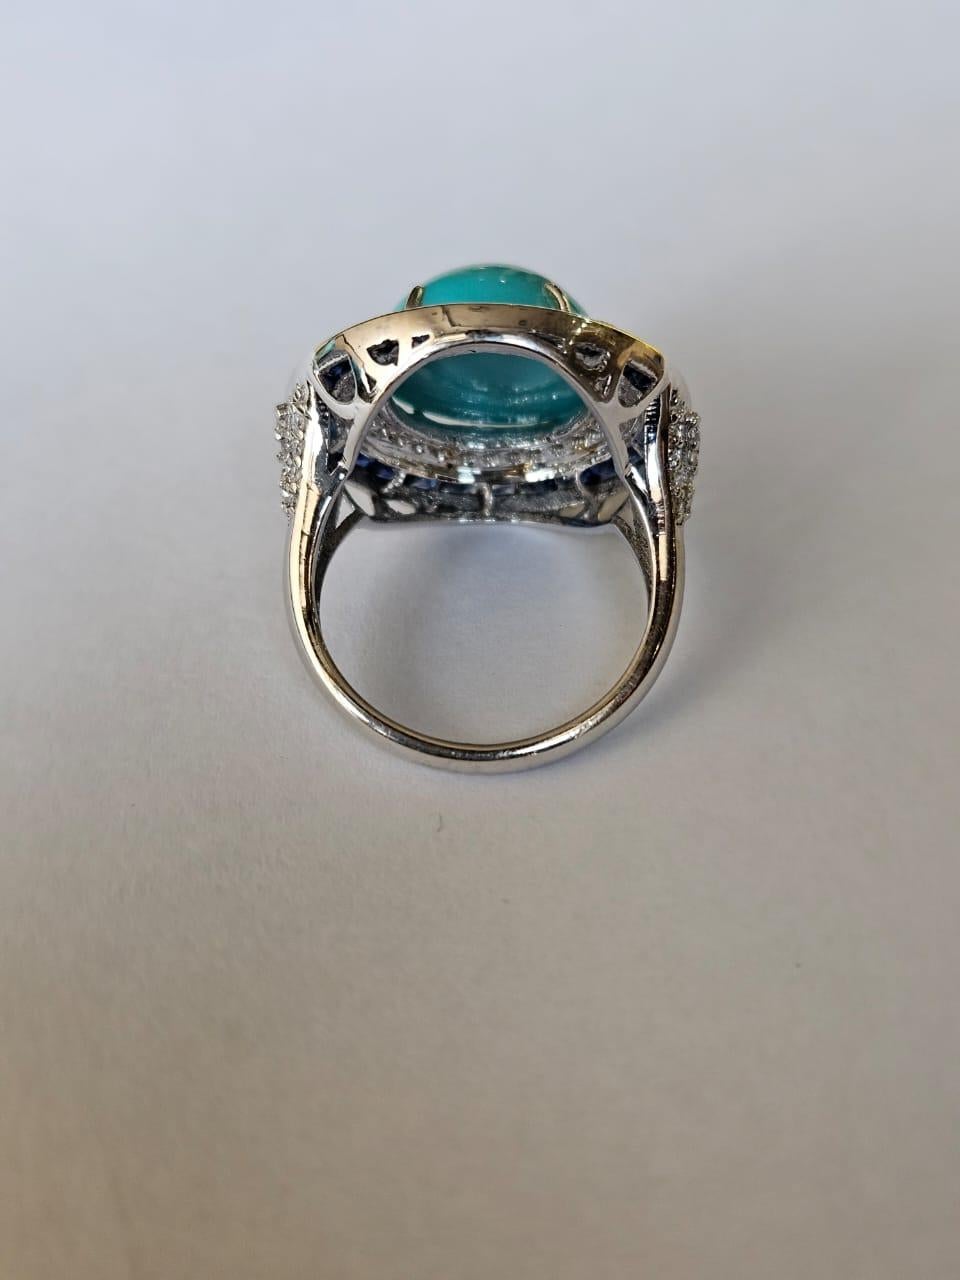 Cabochon Set in 18K Gold, 8.65 carats Turquoise, Blue Sapphires & Diamonds Cocktail Ring For Sale